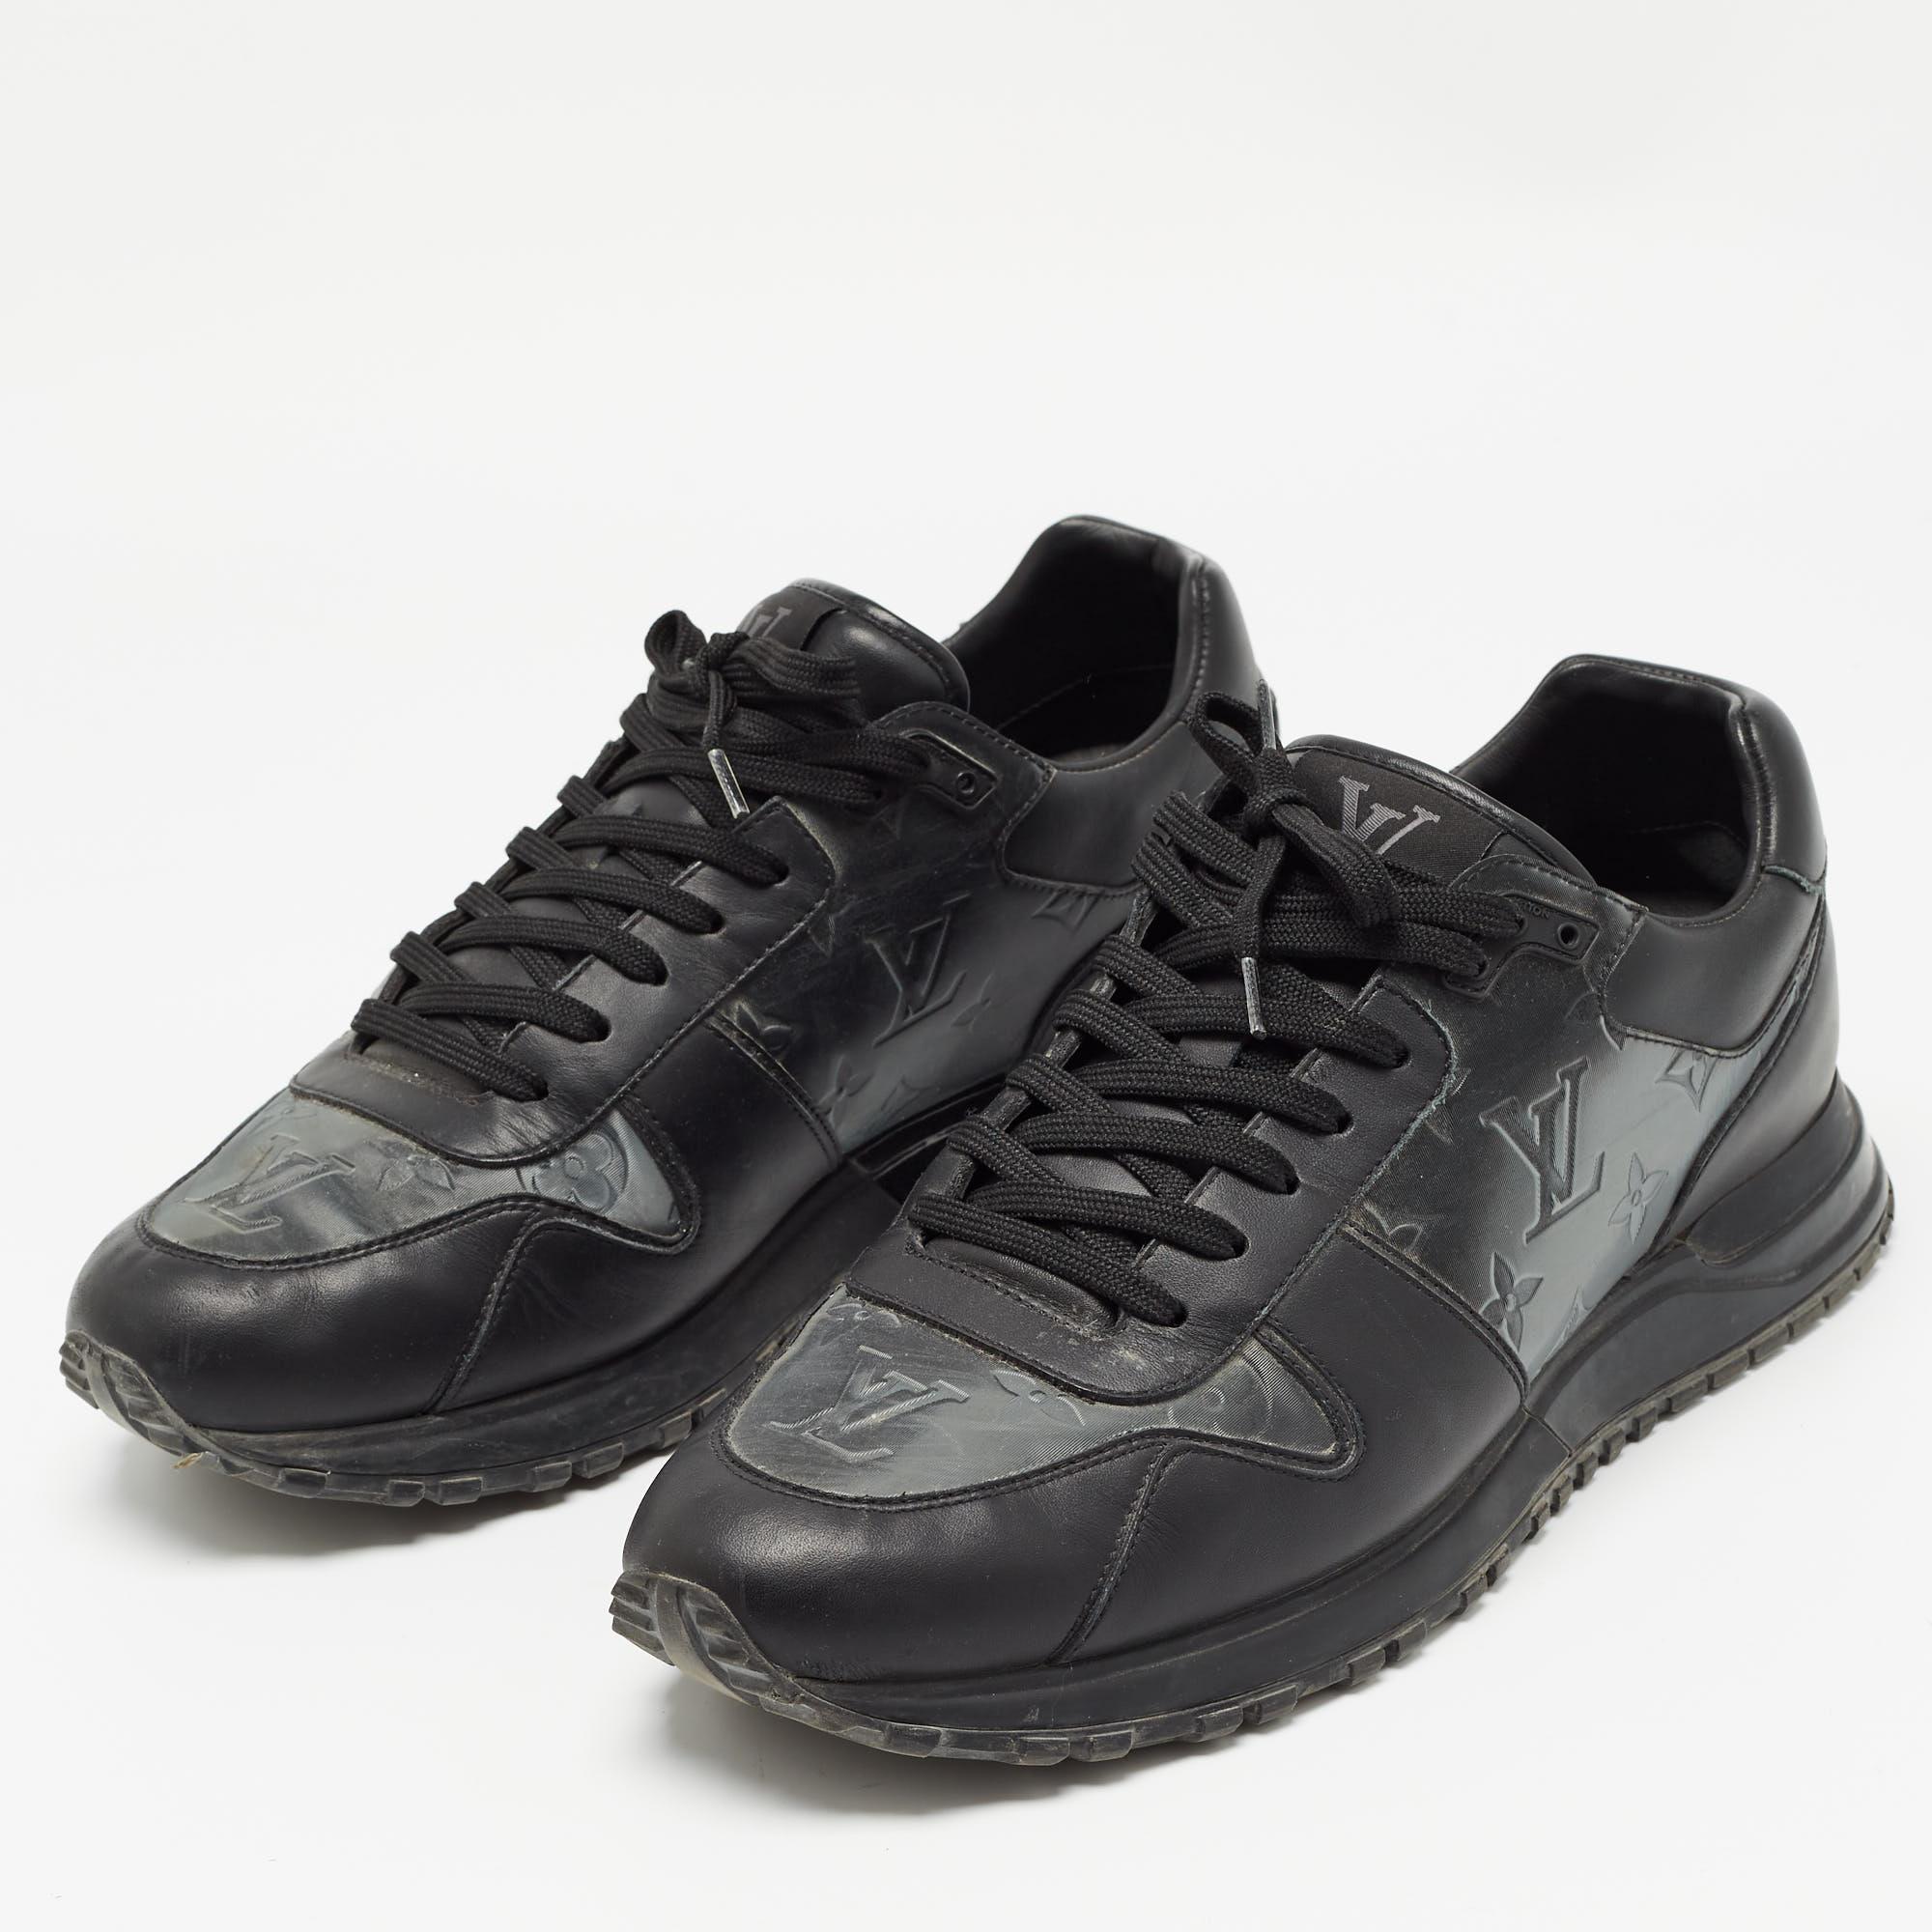 Louis Vuitton Black Monogram PVC and Leather Runaway Sneakers Size 41.5 For Sale 5